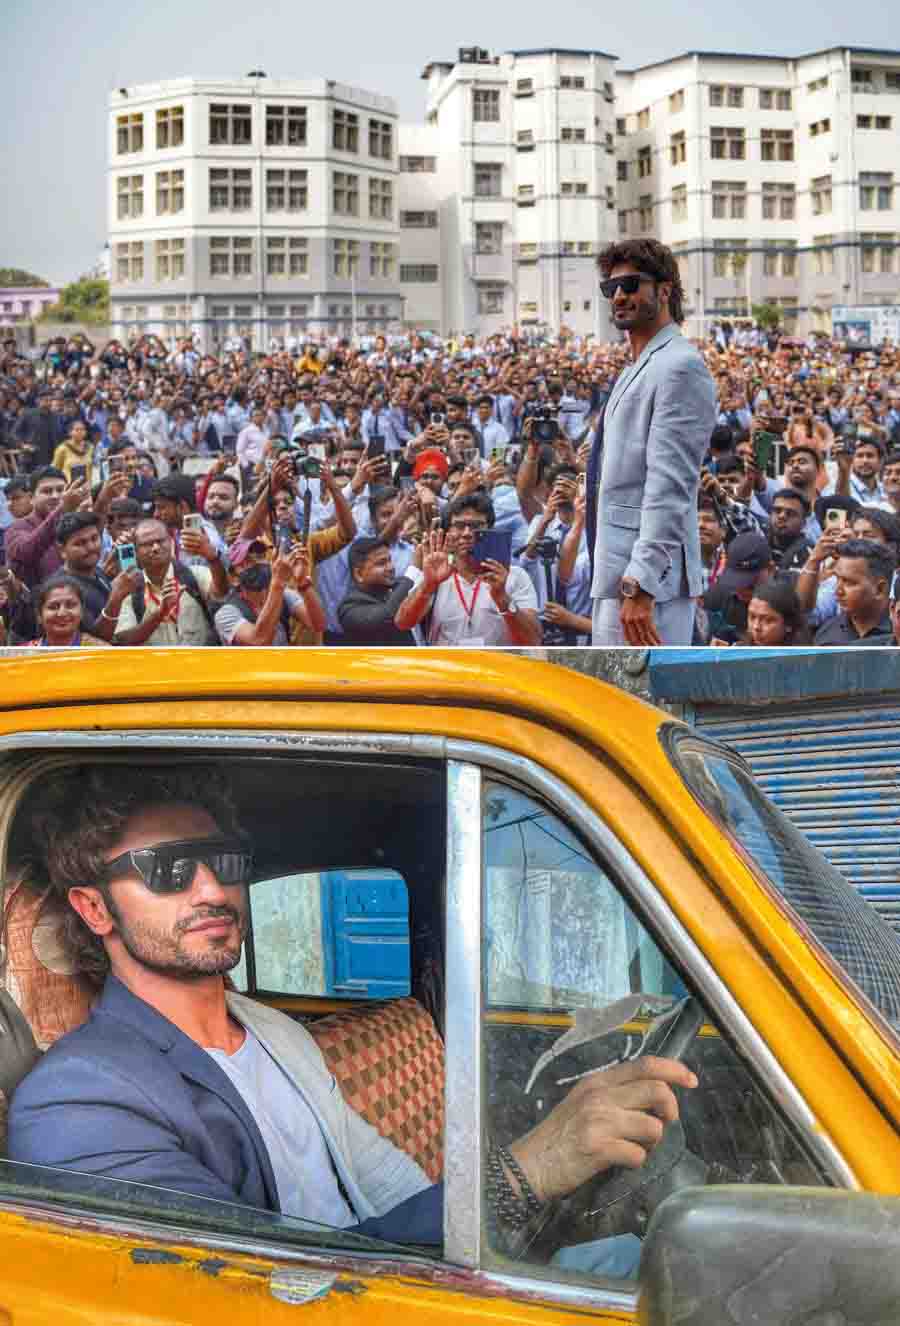 Actor Vidyut Jammwal was in Kolkata to promote his new film 'Crakk: Jeetegaa toh Jiyegaa'. He interacted with his fans and enjoyed Bengali snacks and sweets from roadside stalls